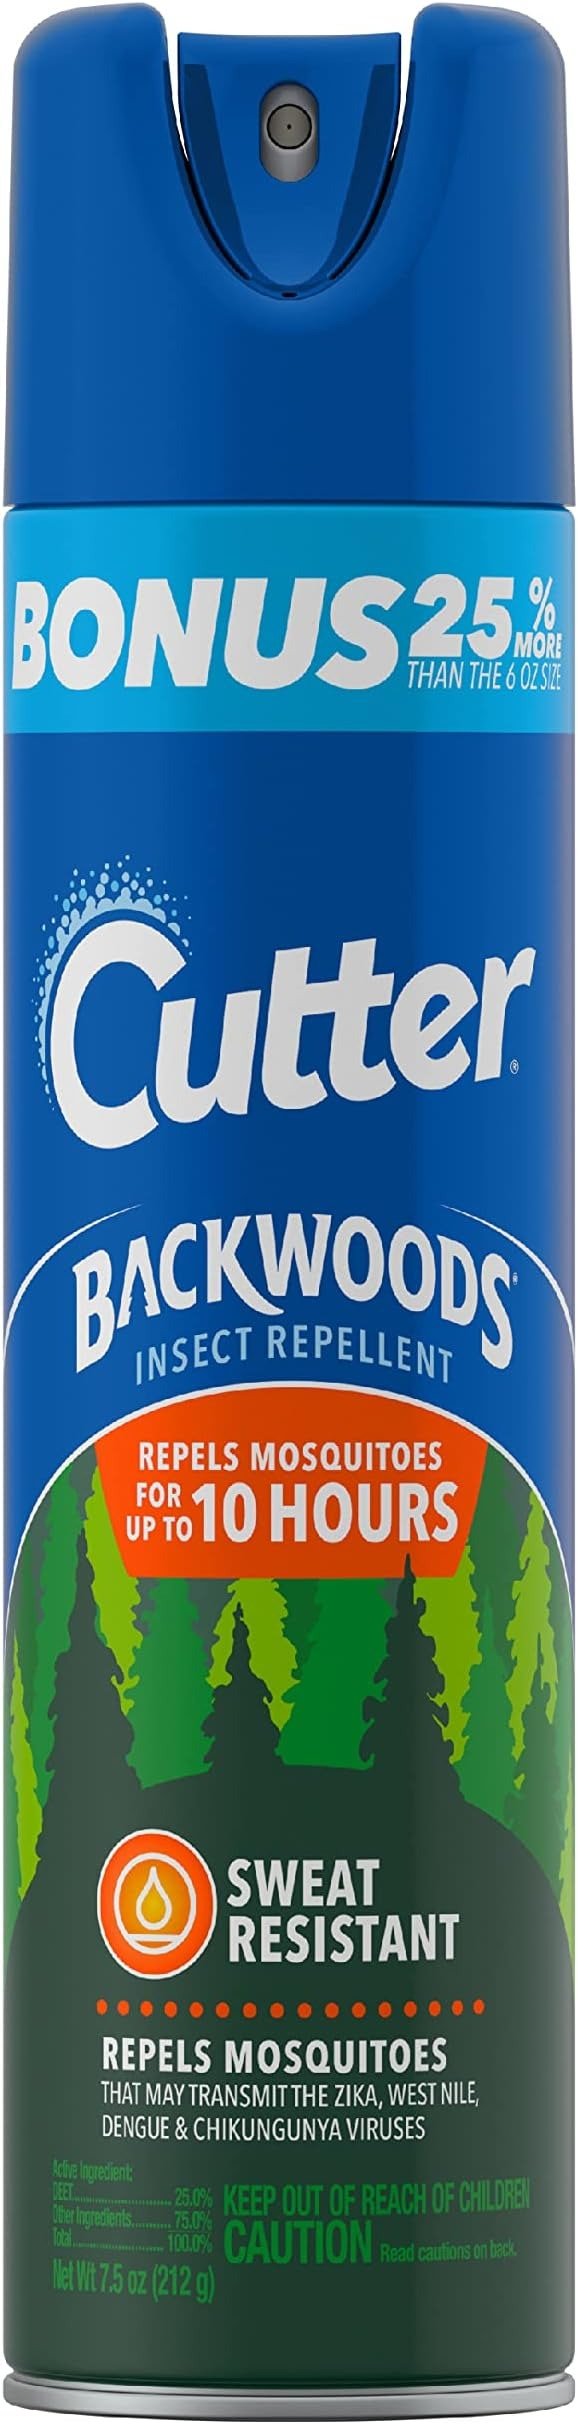 Backwoods Insect Repellent, Repels Mosquitos for Up To 10 Hours, 25% DEET, 7.5 Ounce (Aerosol Spray)